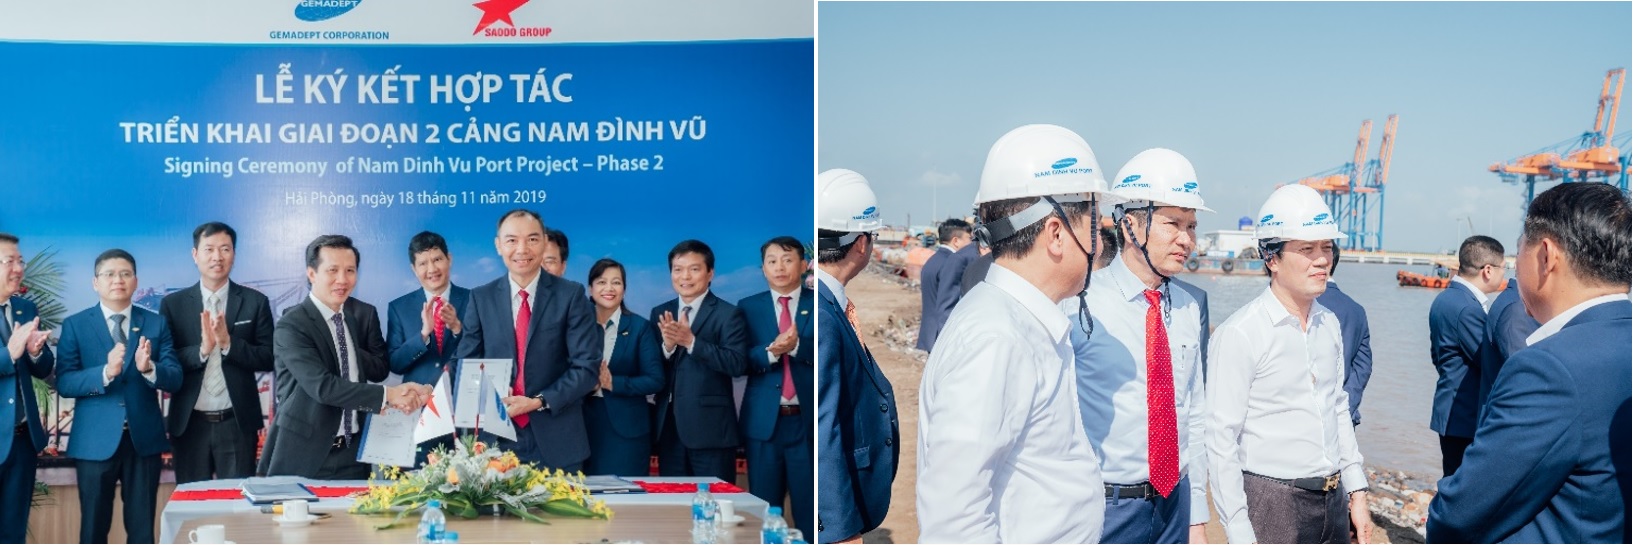 Signing ceremony for the phase 2 between Sao Do Group and Gemadept Corporation in 2019